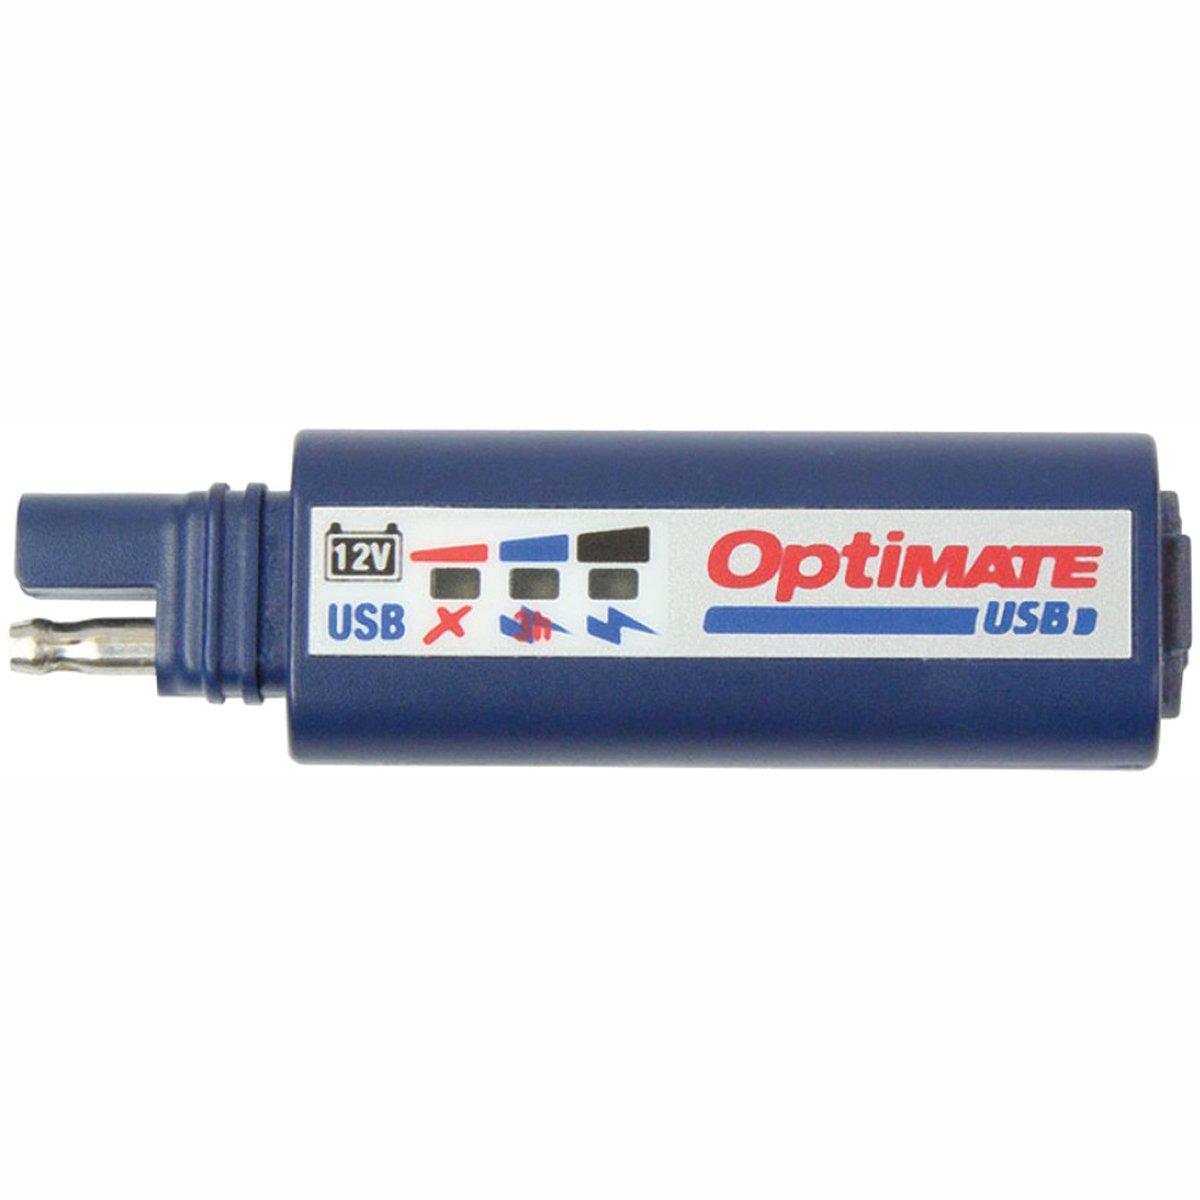 Optimate Universal USB Charger (SAE Connector) - Black - Browse our range of Care: Chargers - getgearedshop 